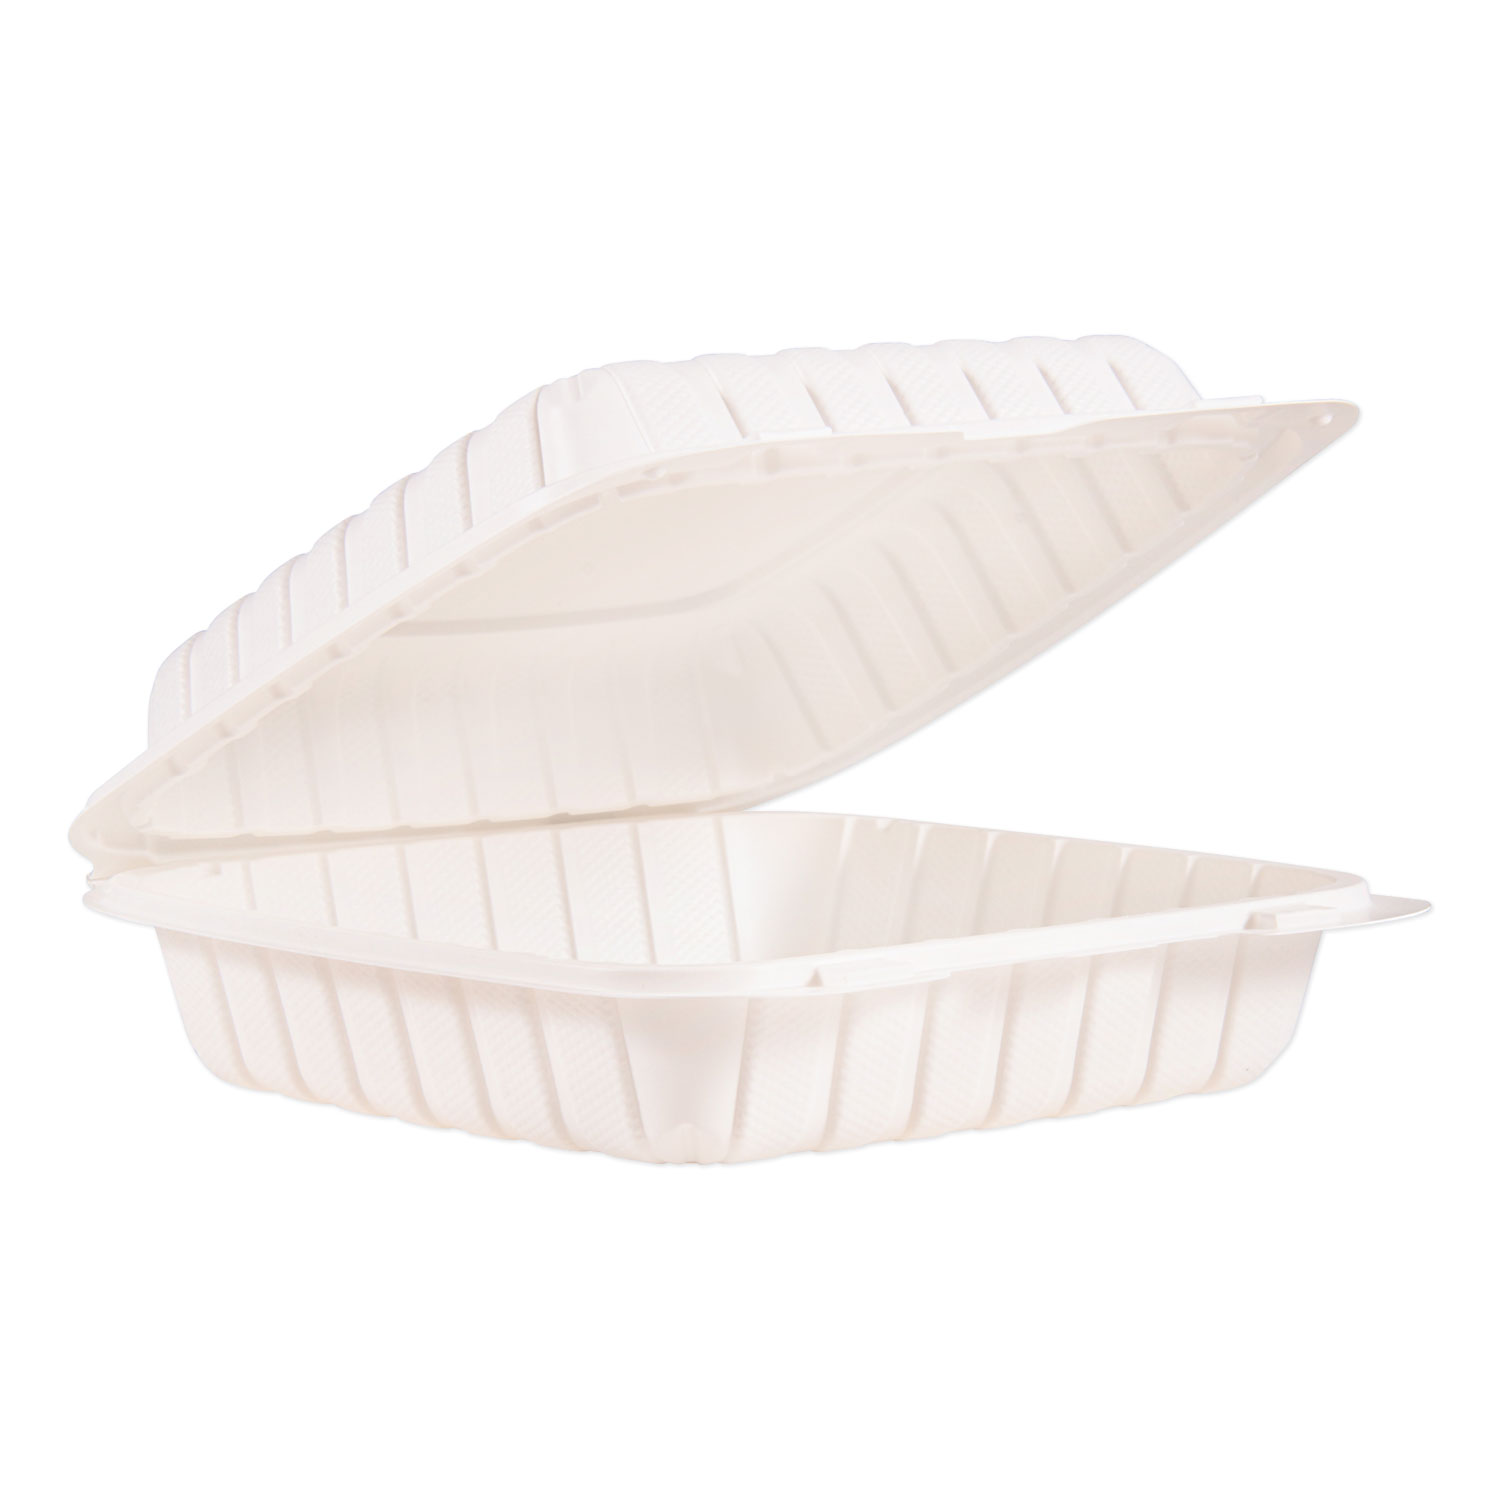 Huhtamaki 68007 Catering Hinged Clamshell Food Container 9 x 13 x 3,  Molded Fiber, 1-Compartment